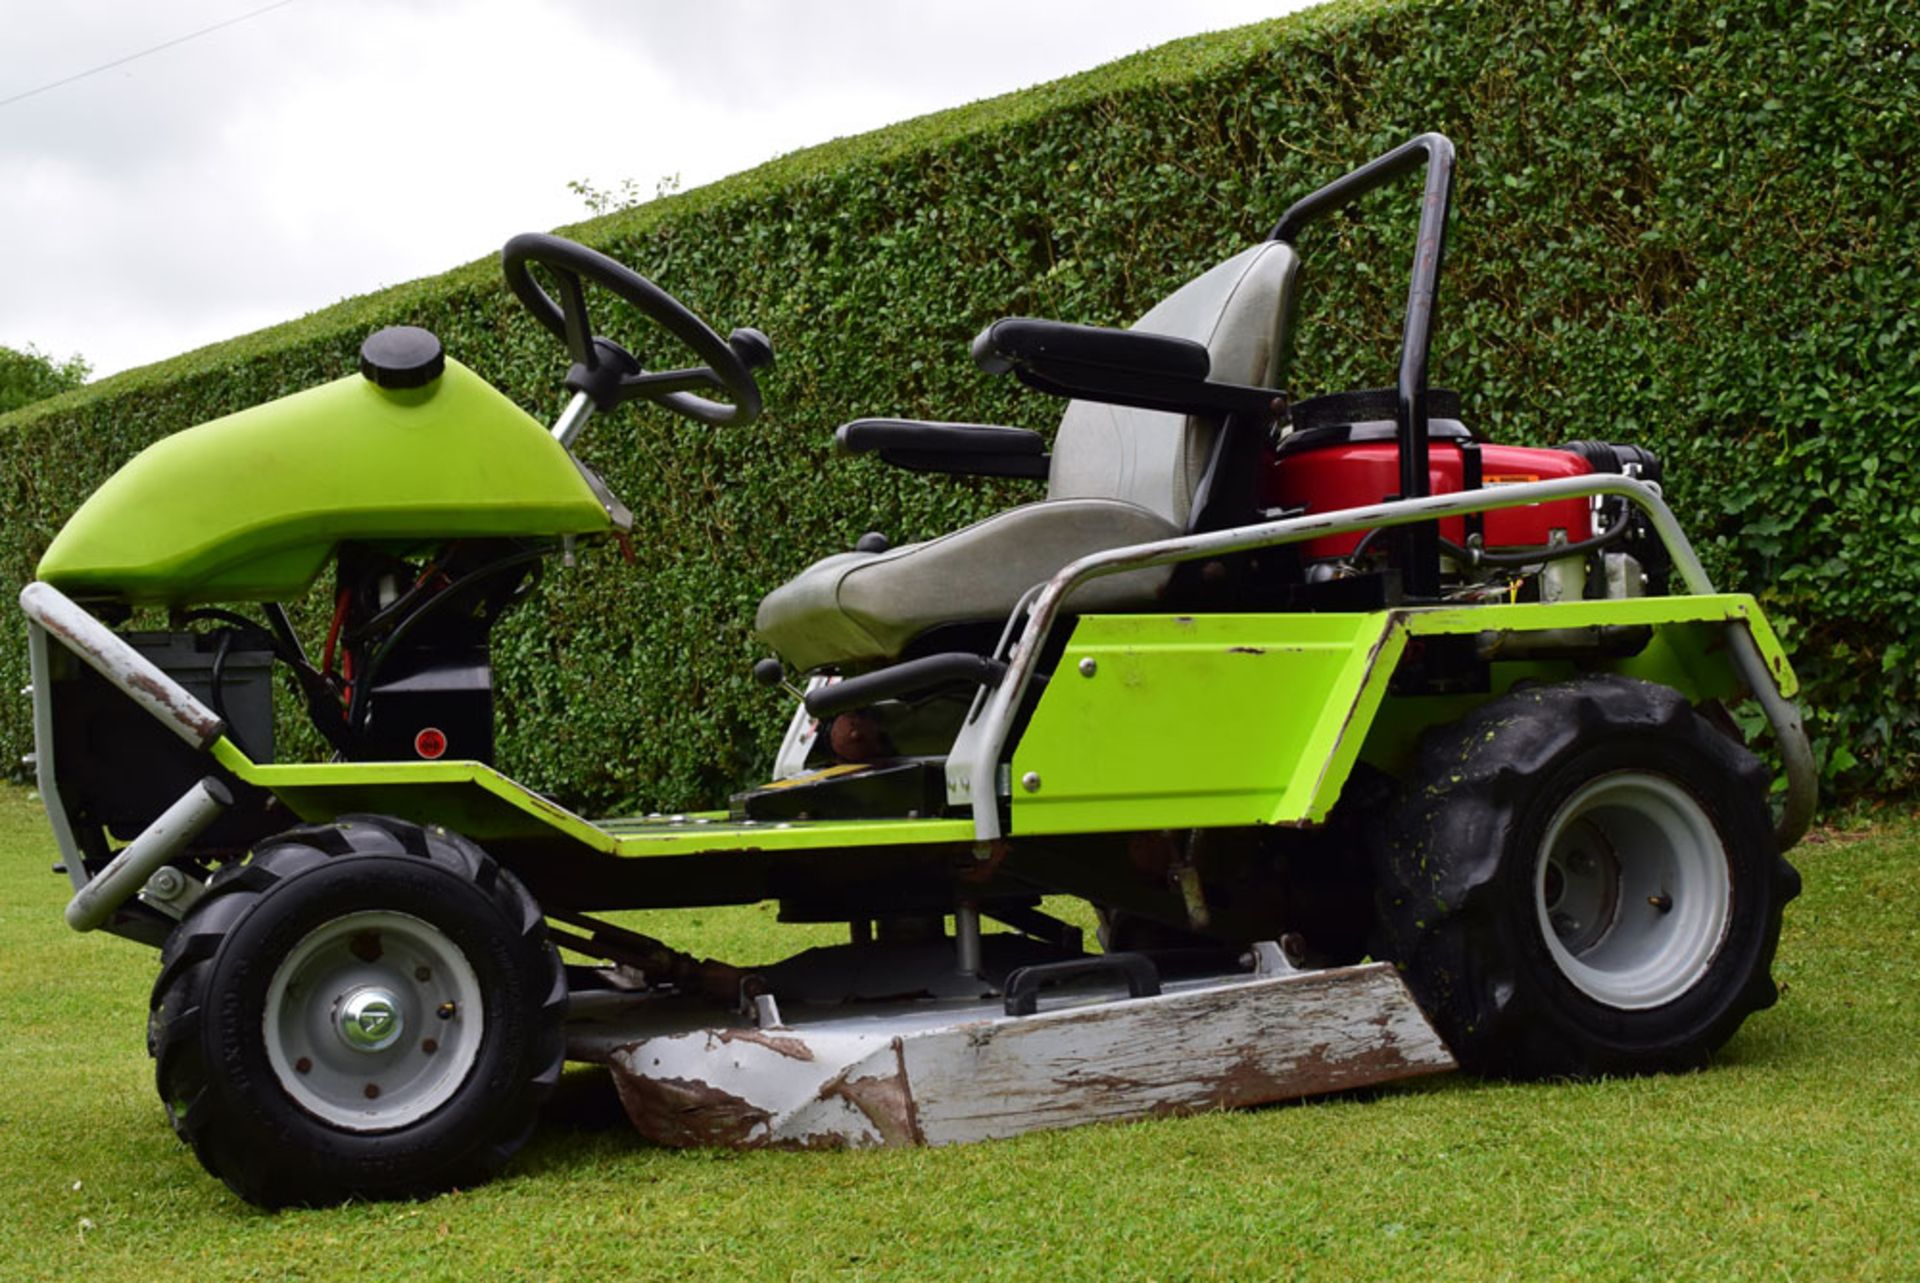 2011 Grillo Climber 9.21 Ride On Rotary Mower